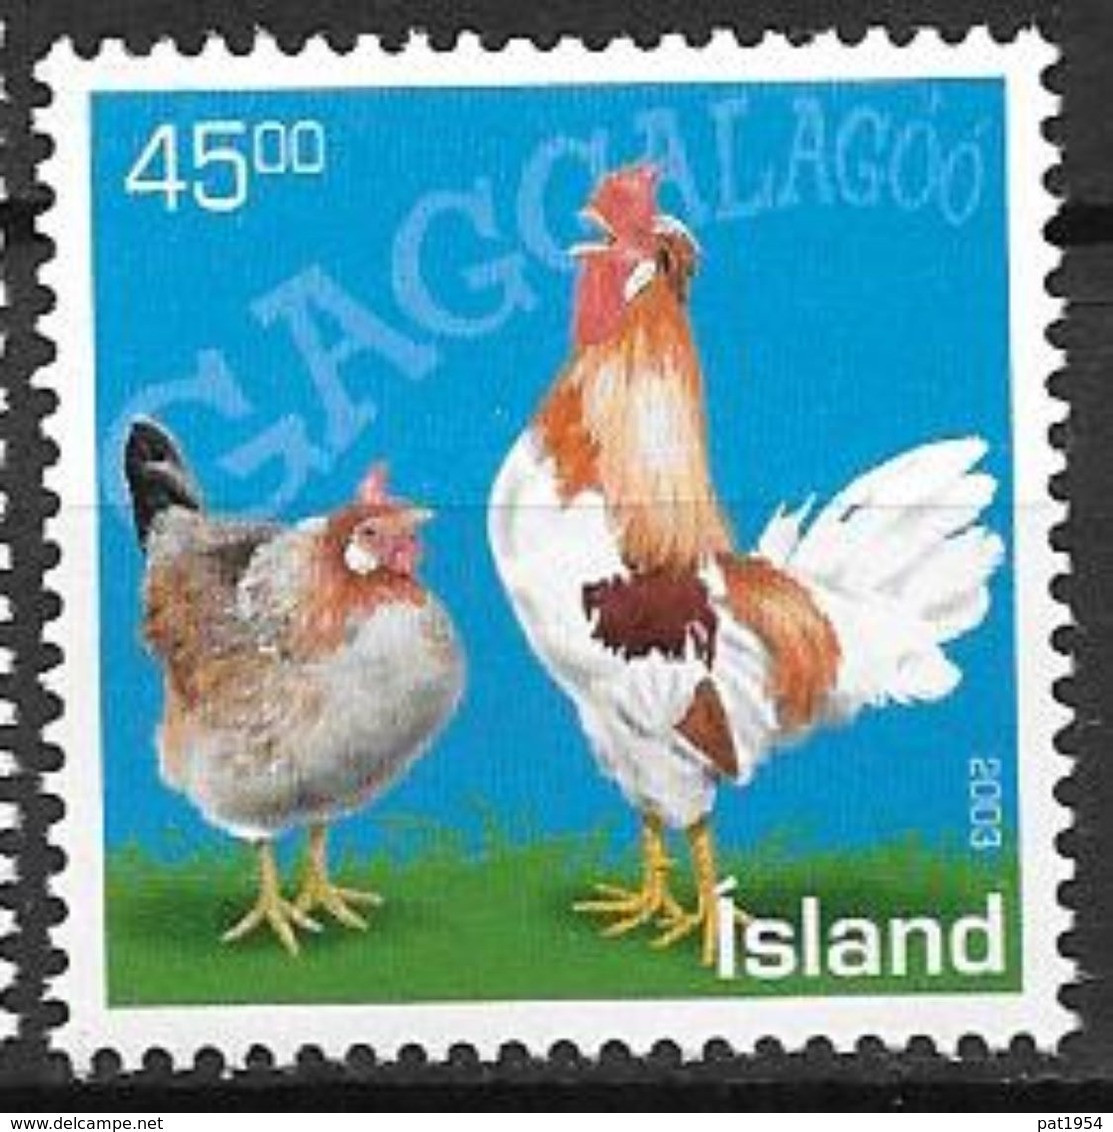 Islande 2003 N°968 Neuf** Animaux Domestiques Poules - Neufs